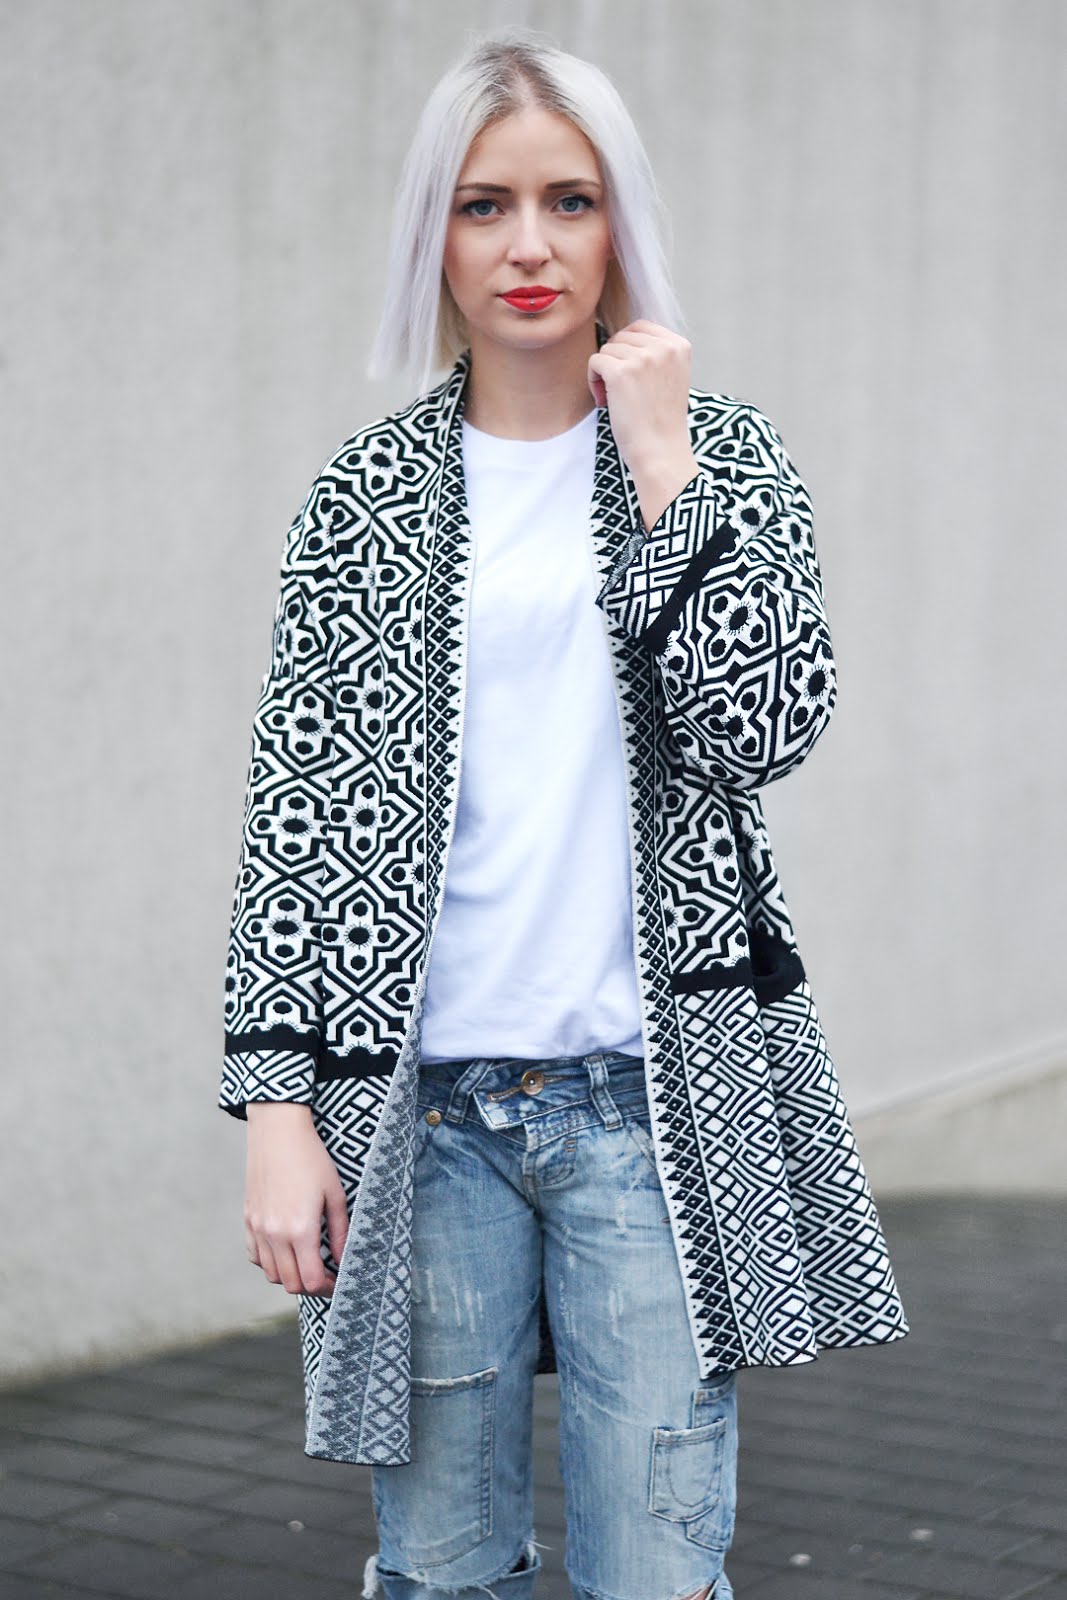 Shein, sheinside, ootd, outfit, black & white cardigan, geometric, casual outfit, winter 2016, trends, streetstyle, zara ripped jeans, h&m pointed boots